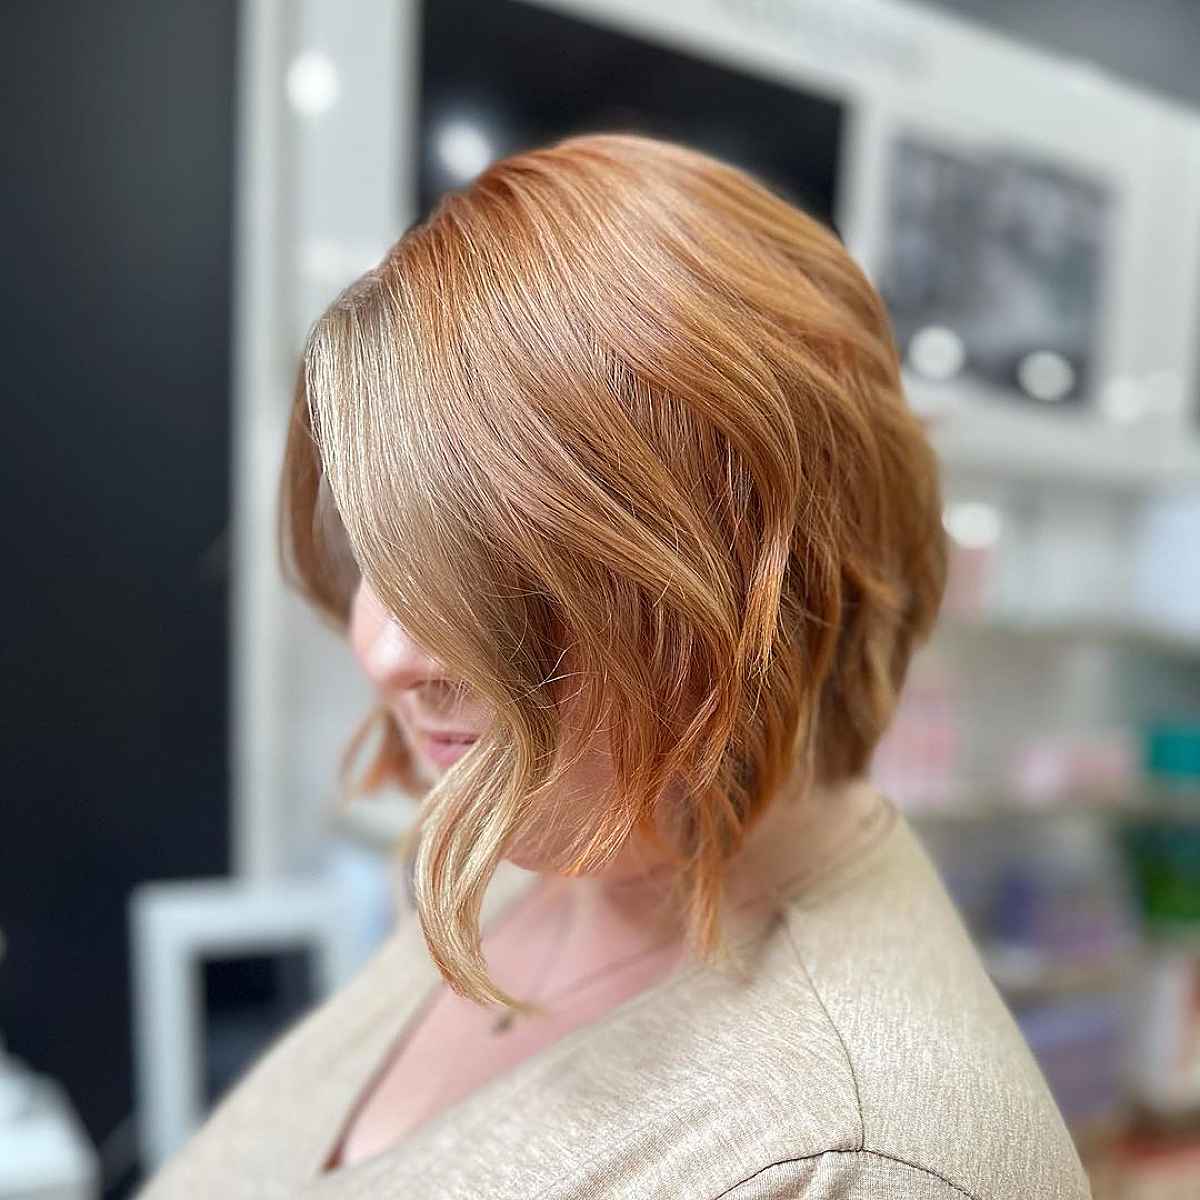 Strawberry blonde fall hair color